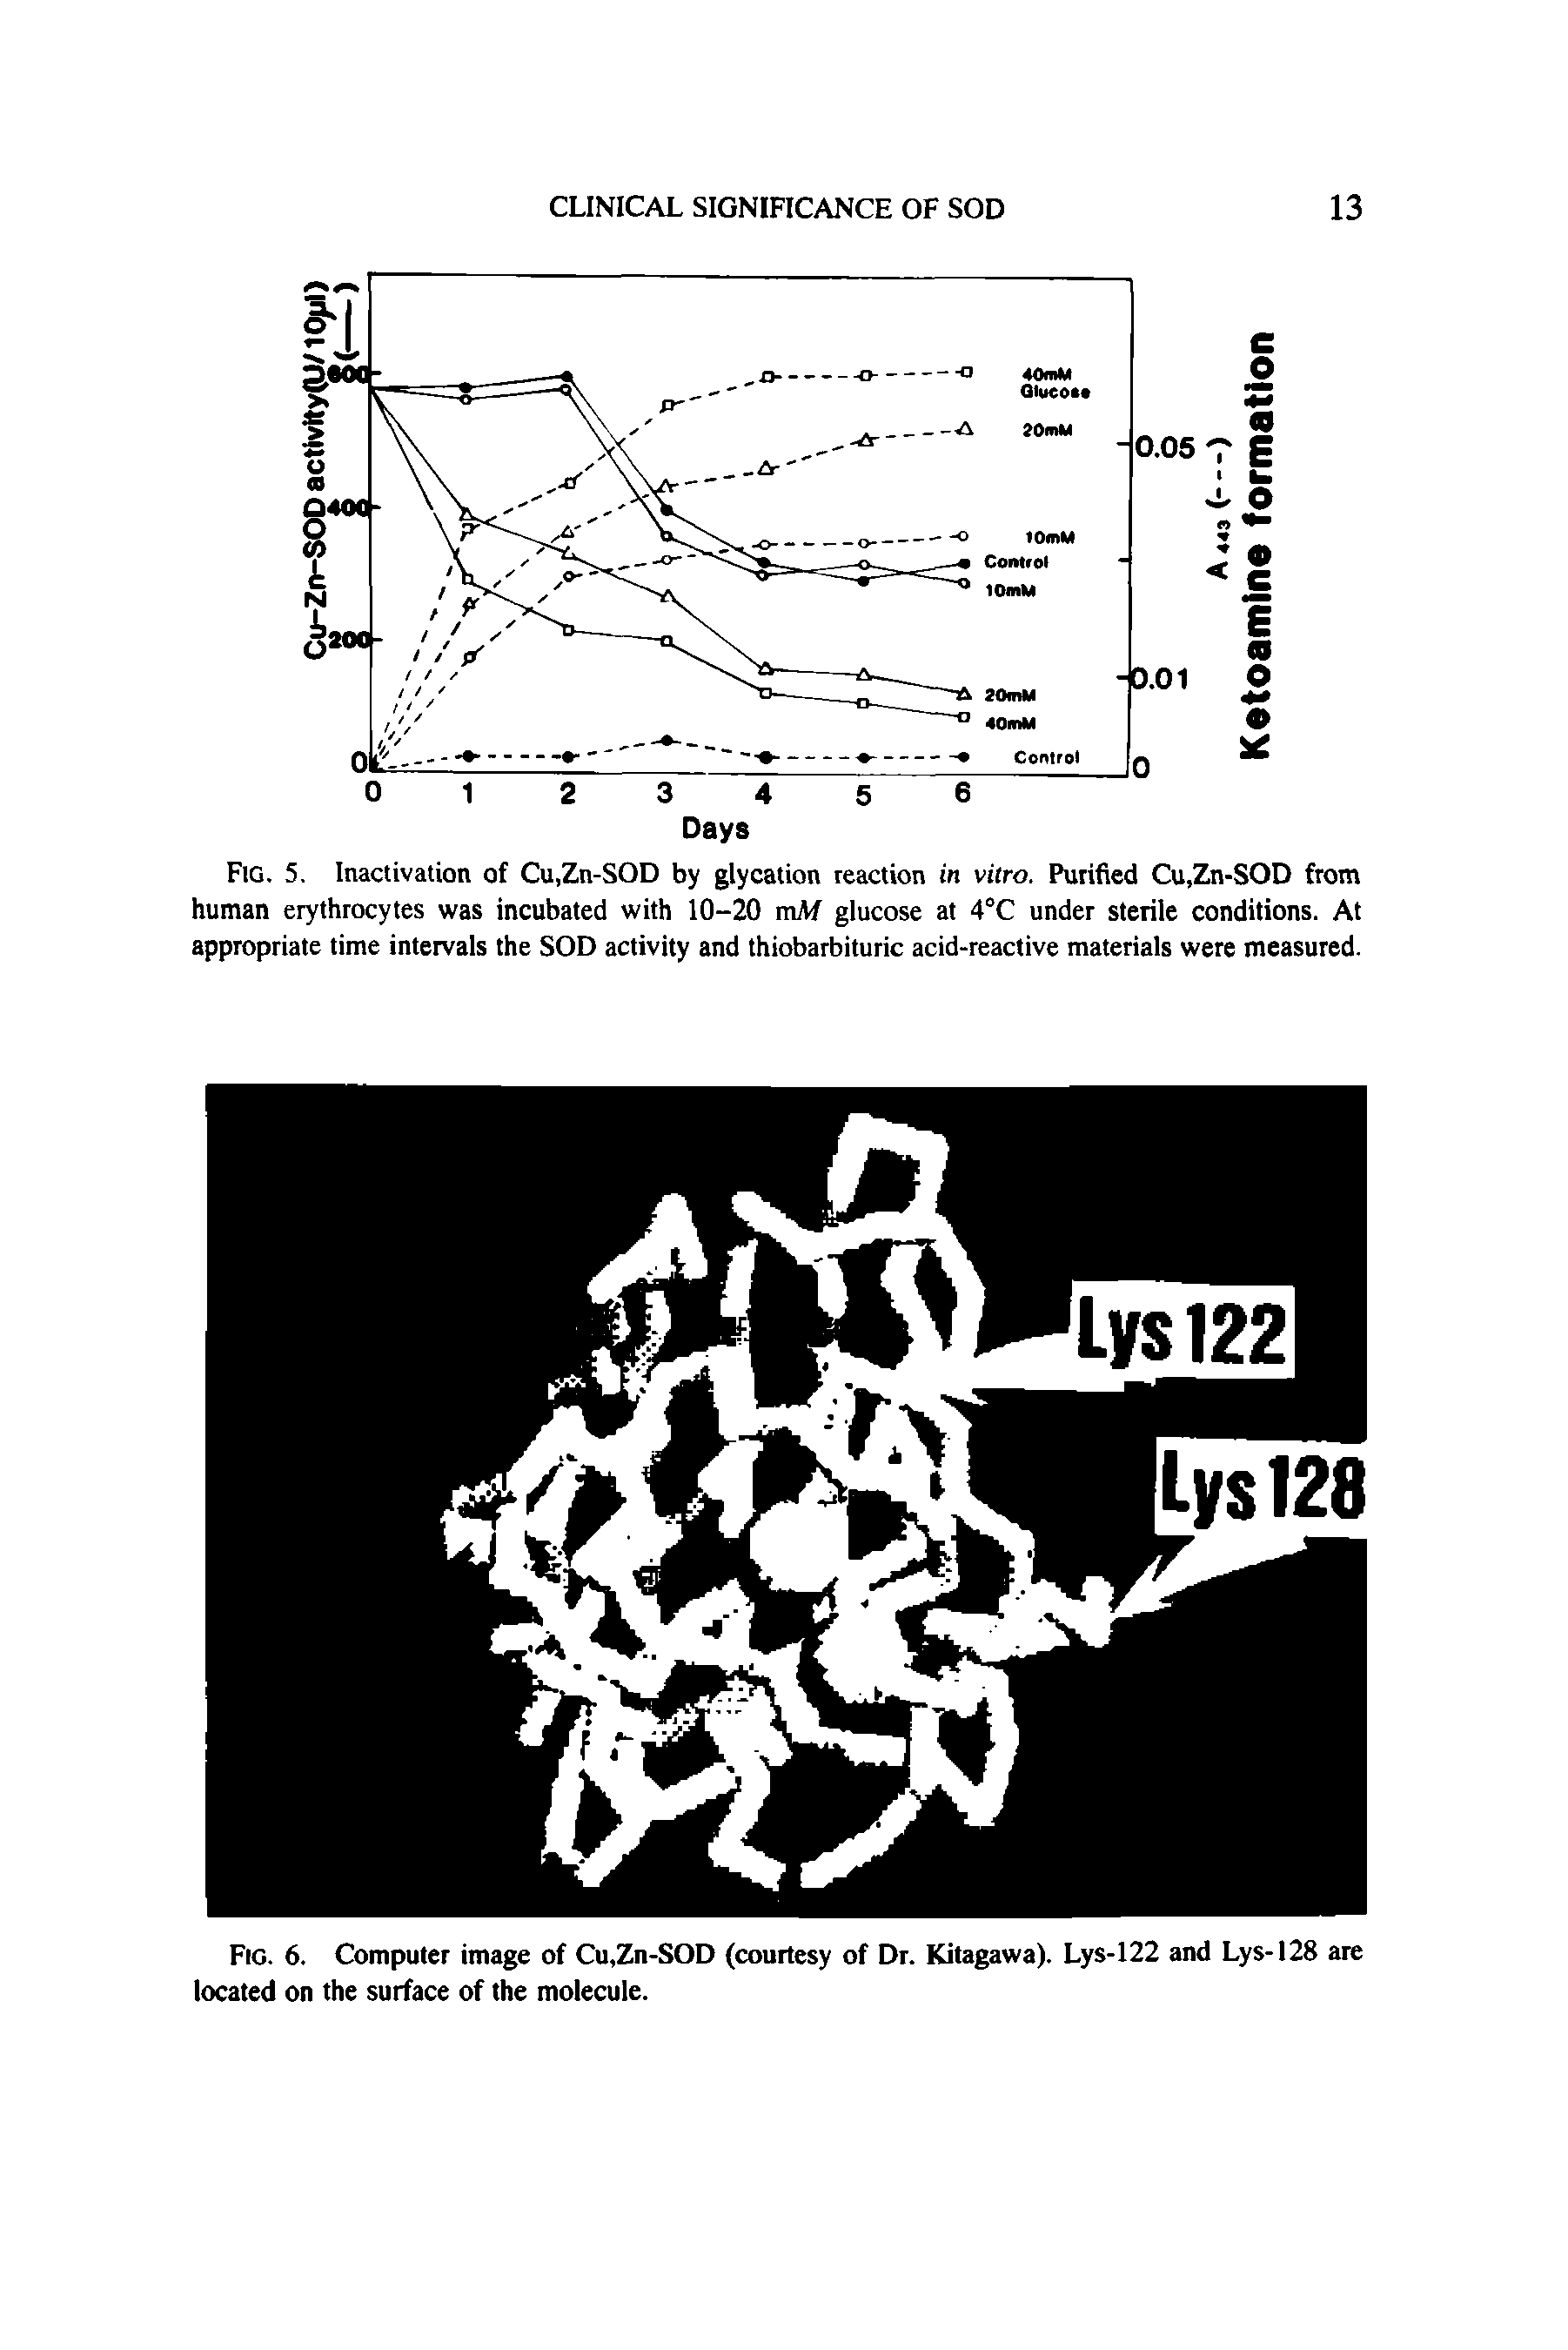 Fig. 5. Inactivation of Cu,Zn-SOD by glycation reaction in vitro. Purified Cu,Zn-SOD from human erythrocytes was incubated with 10-20 mAf glucose at 4°C under sterile conditions. At appropriate time intervals the SOD activity and thiobarbituric acid-reactive materials were measured.